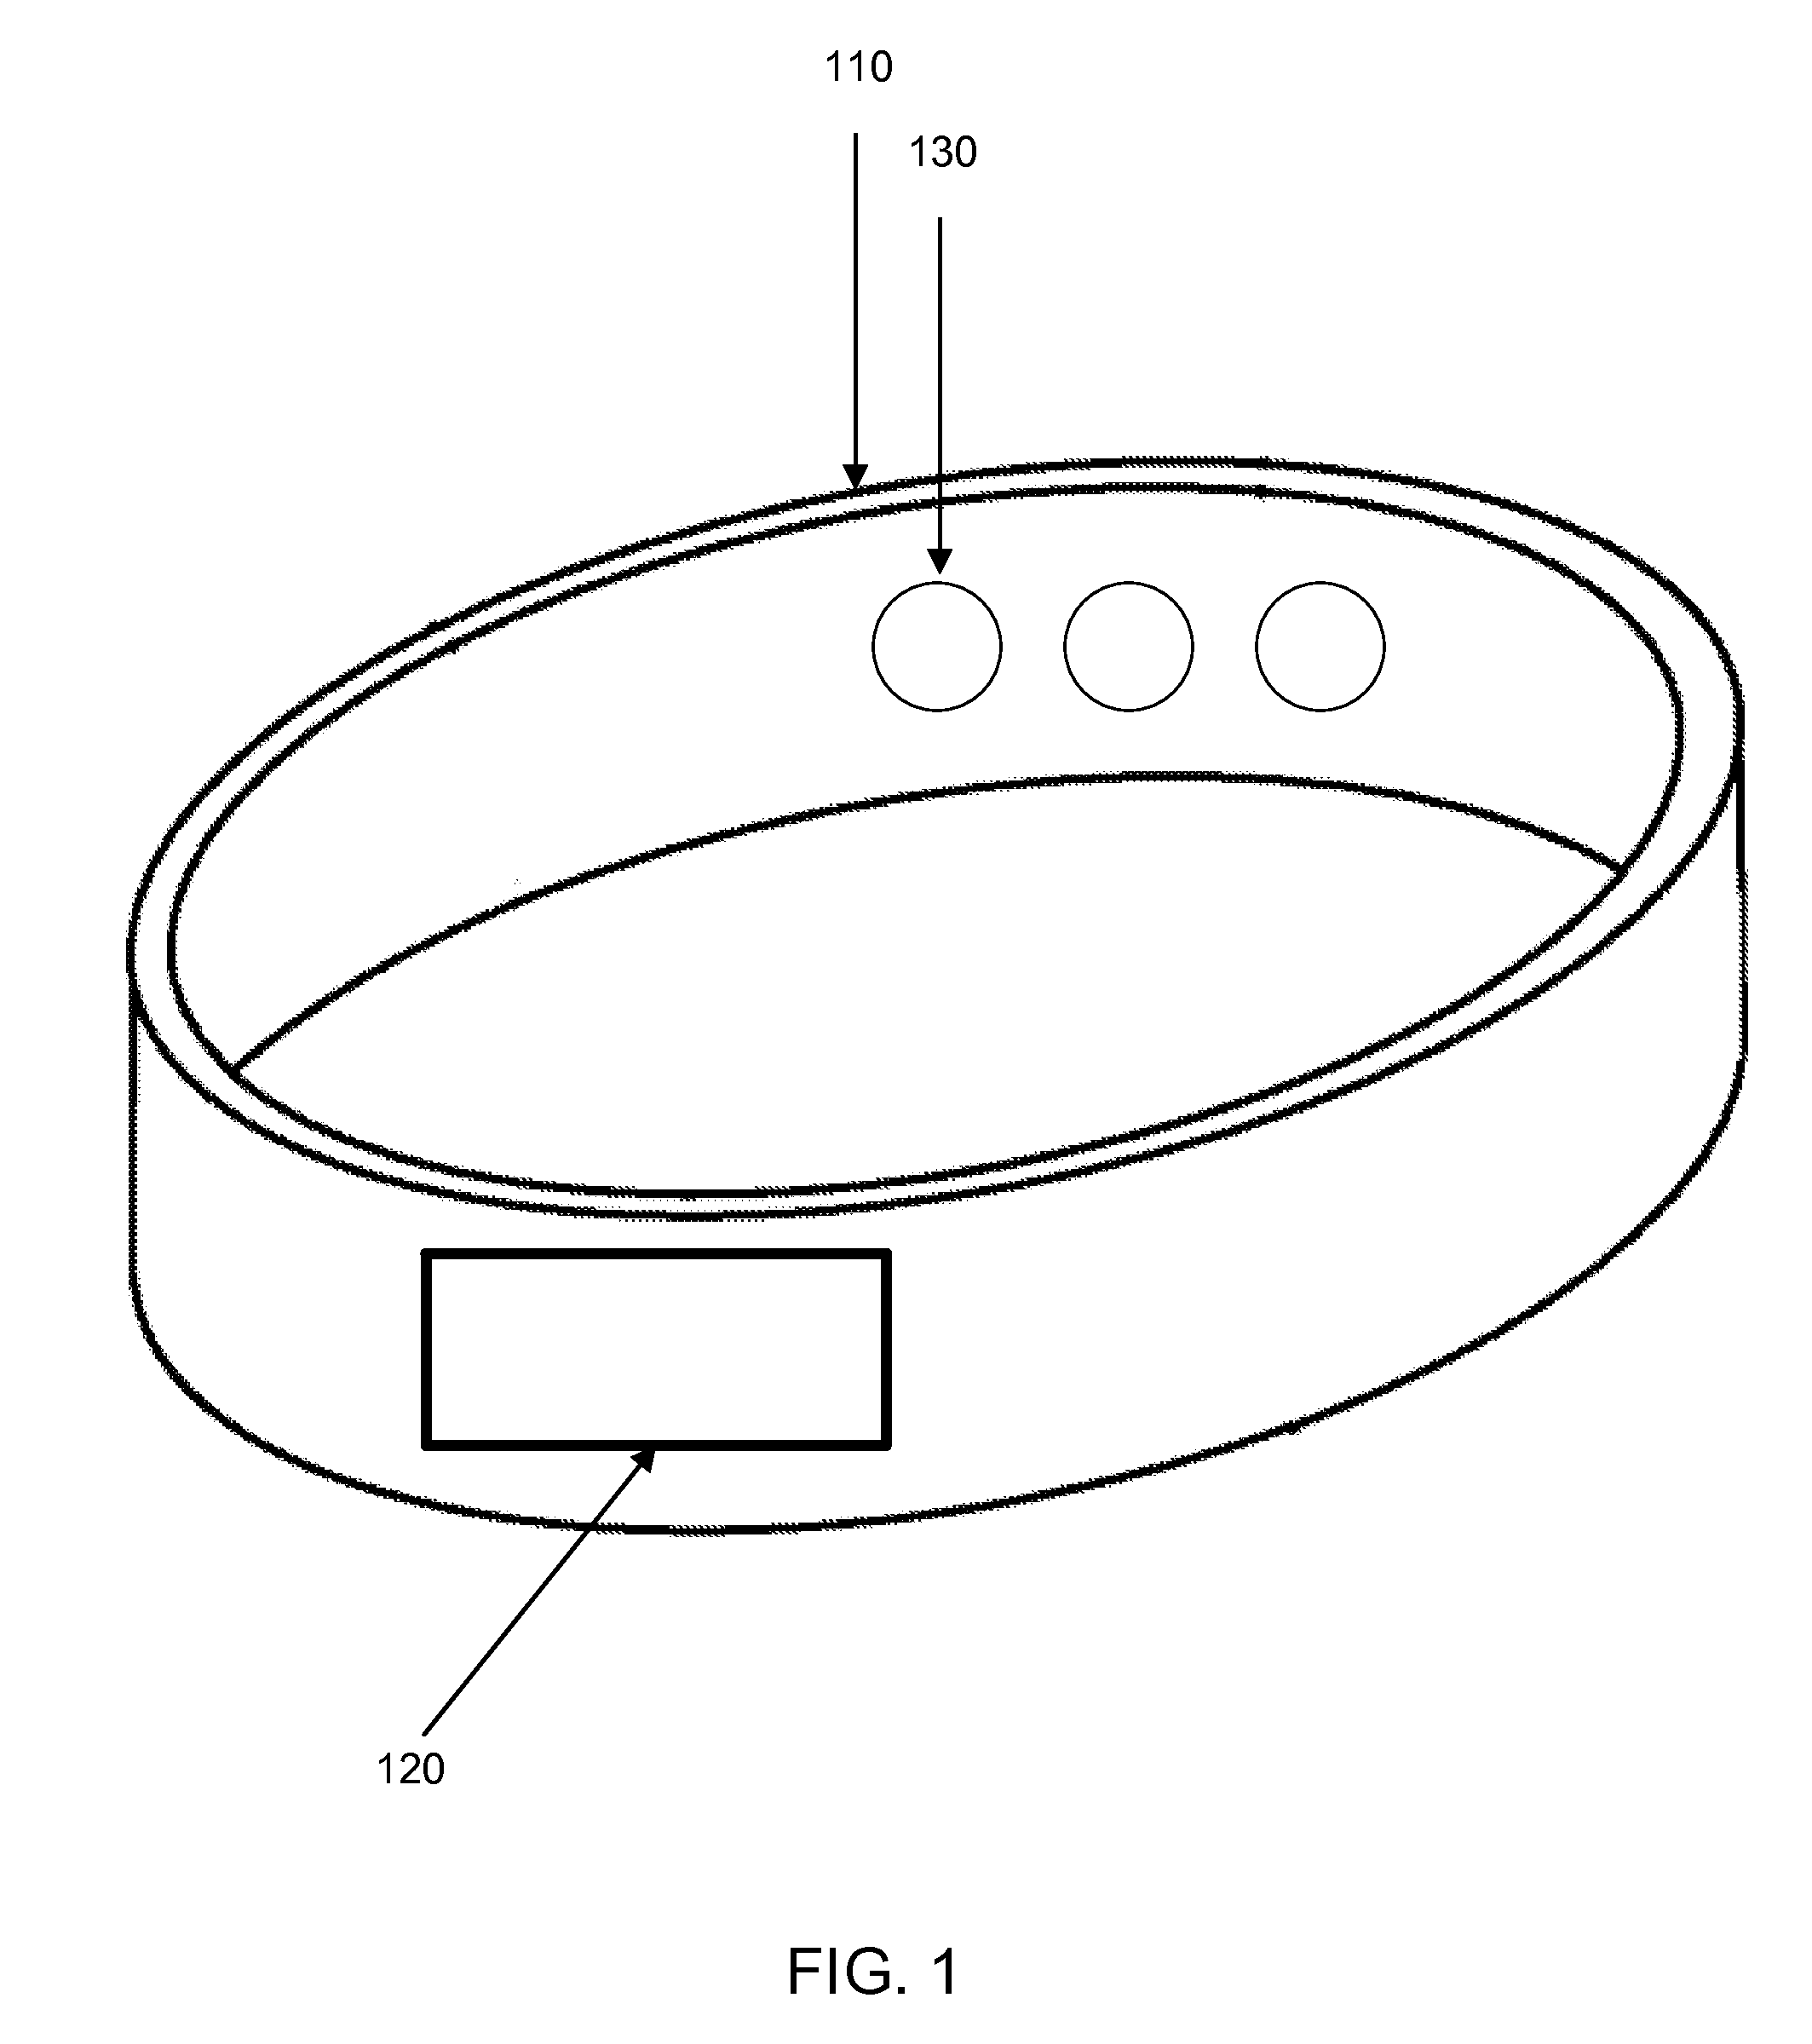 Calibration of a wearable medical device